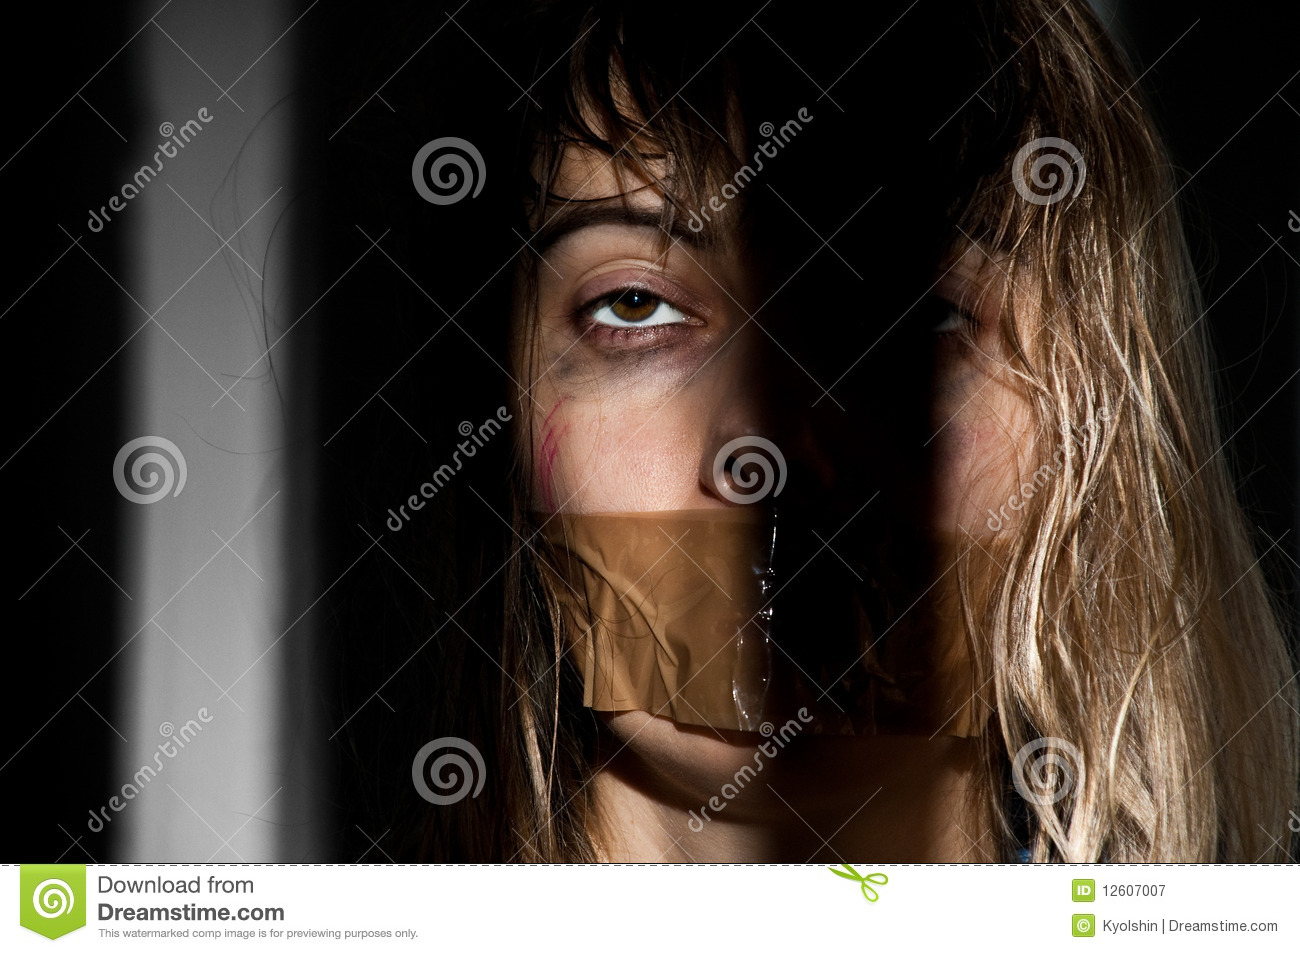 Woman Hostage Royalty Free Stock Photography   Image  12607007